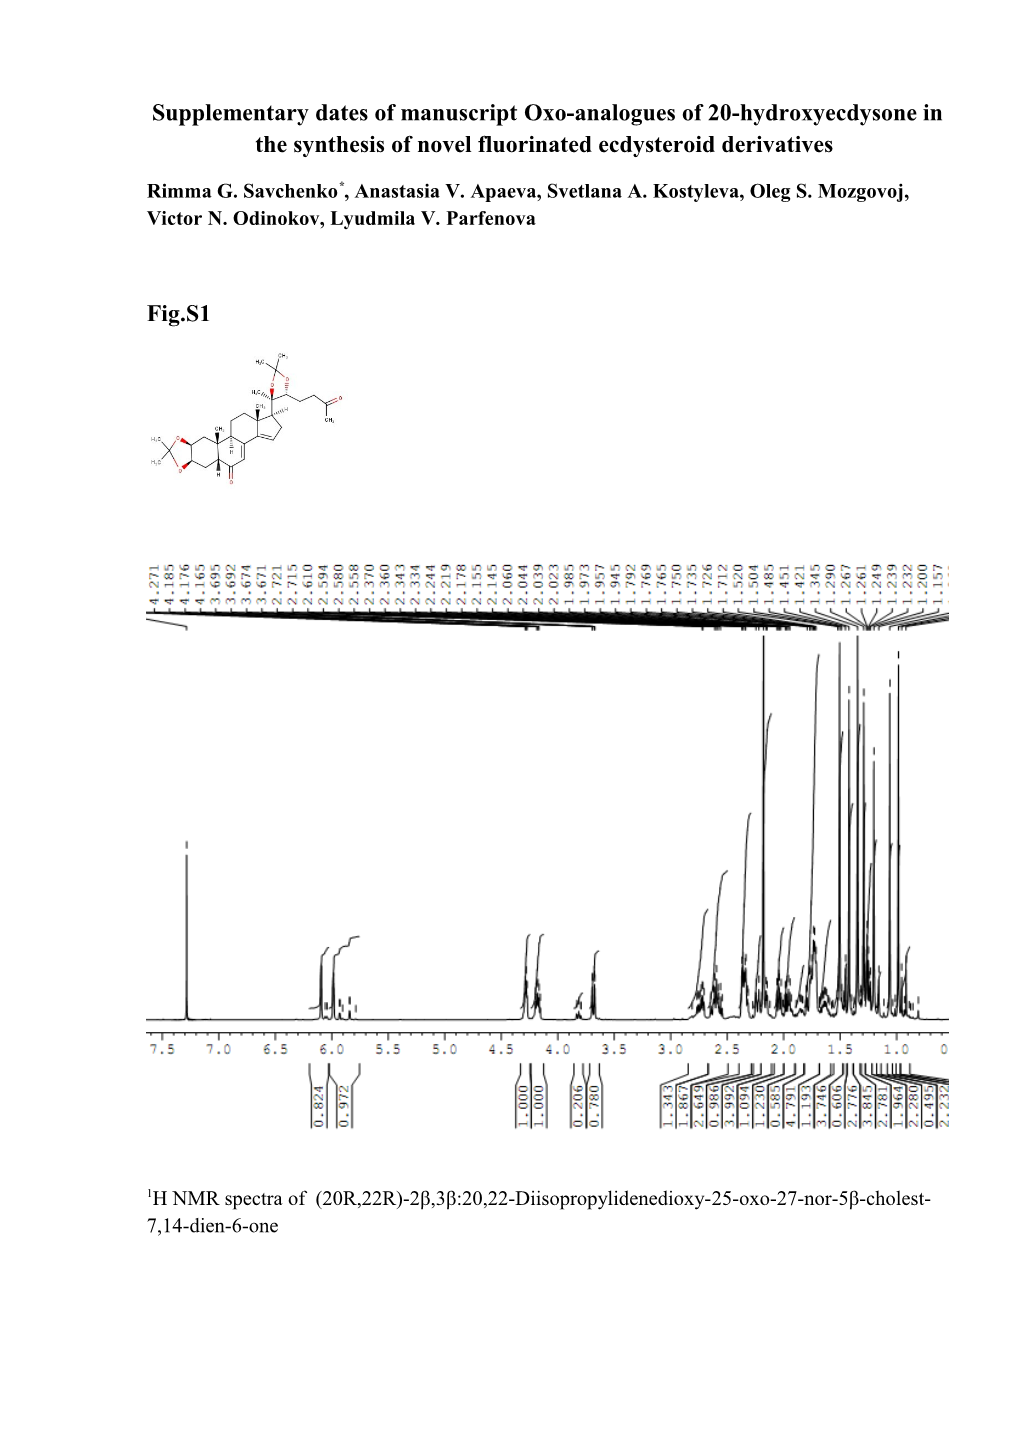 Supplementary Dates of Manuscriptoxo-Analogues of 20-Hydroxyecdysone in the Synthesisofnovel